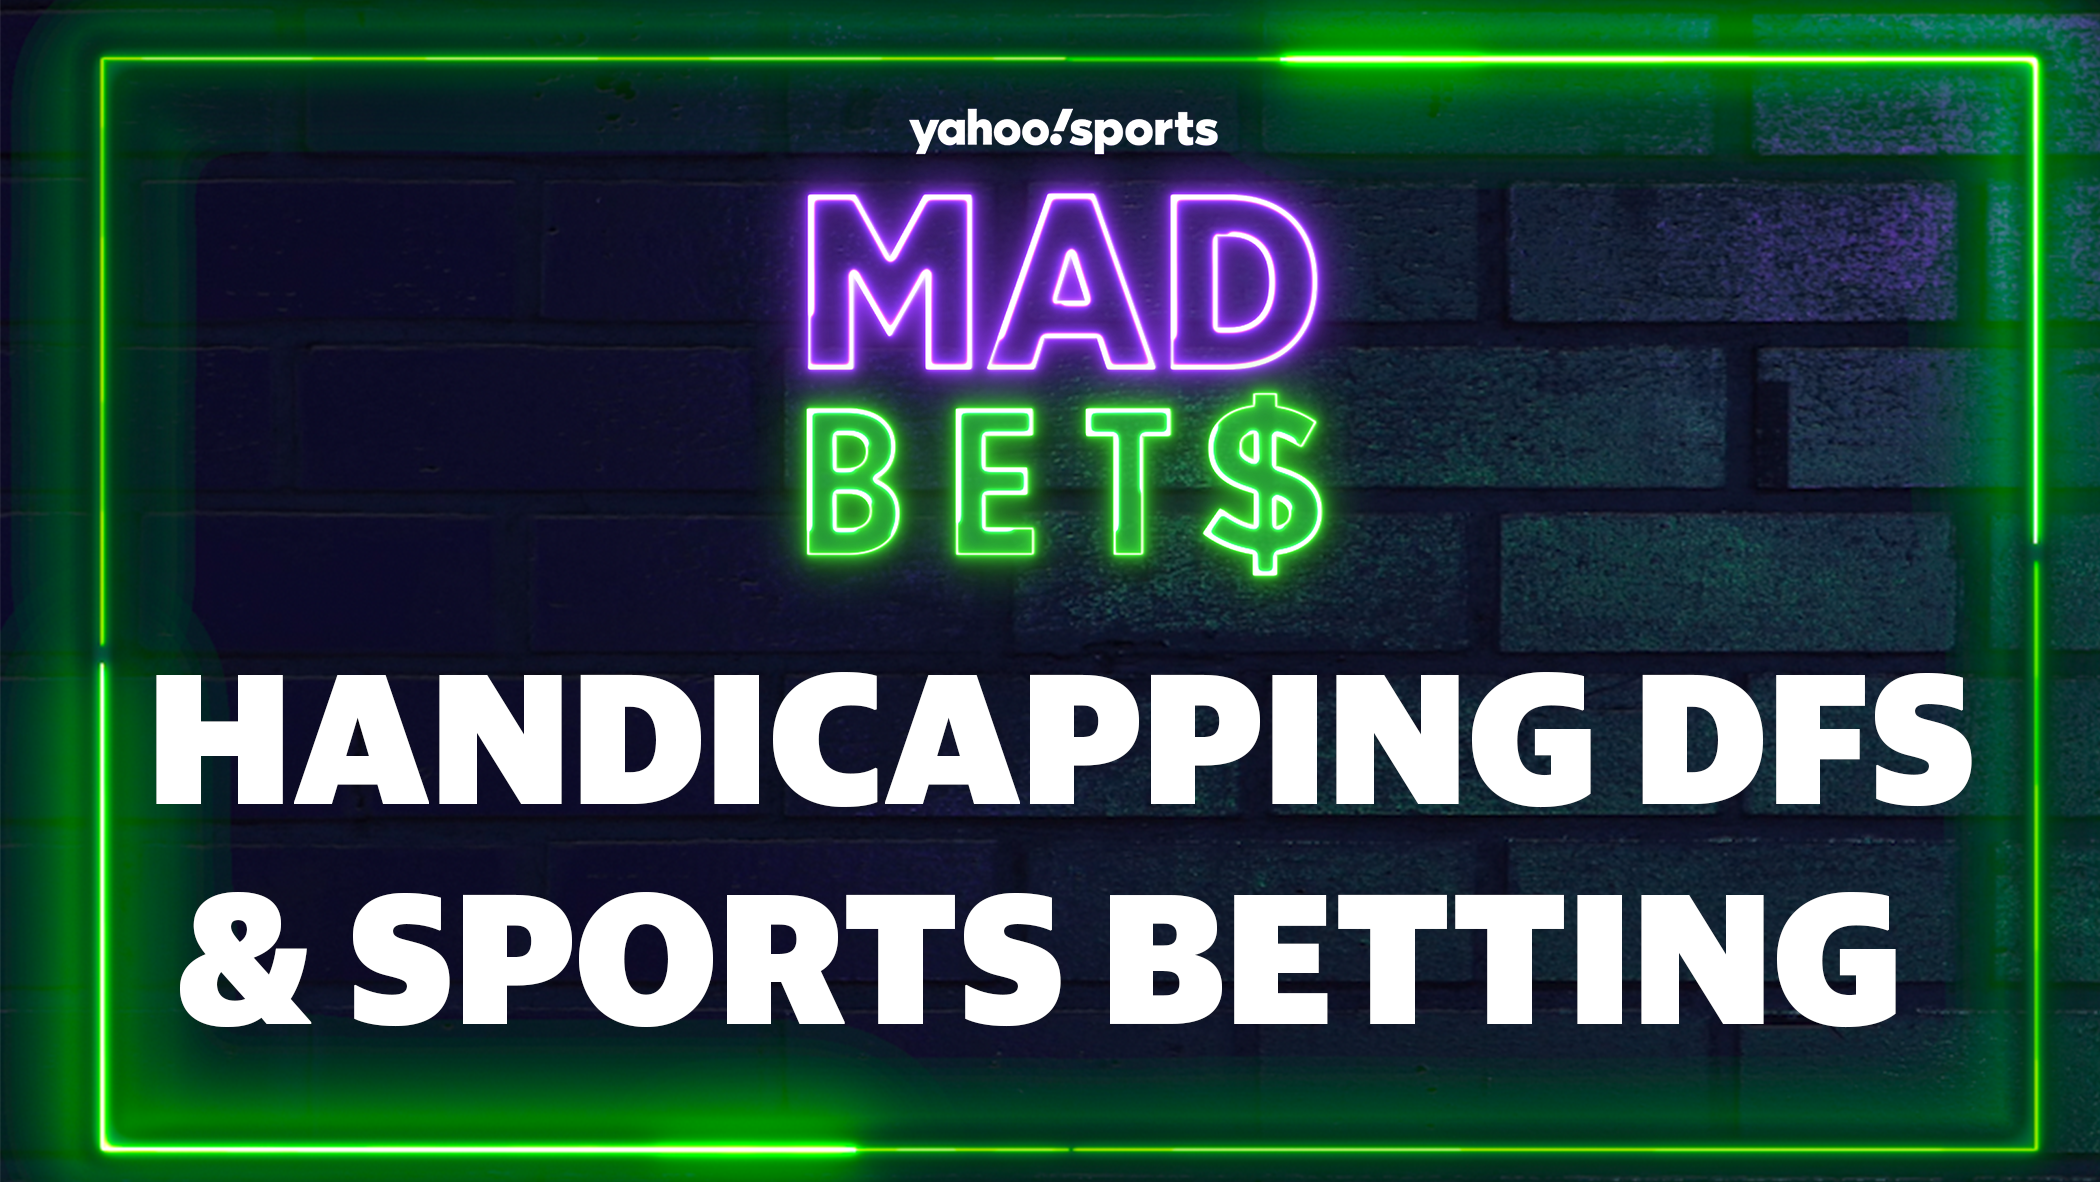 Dfs betting sites